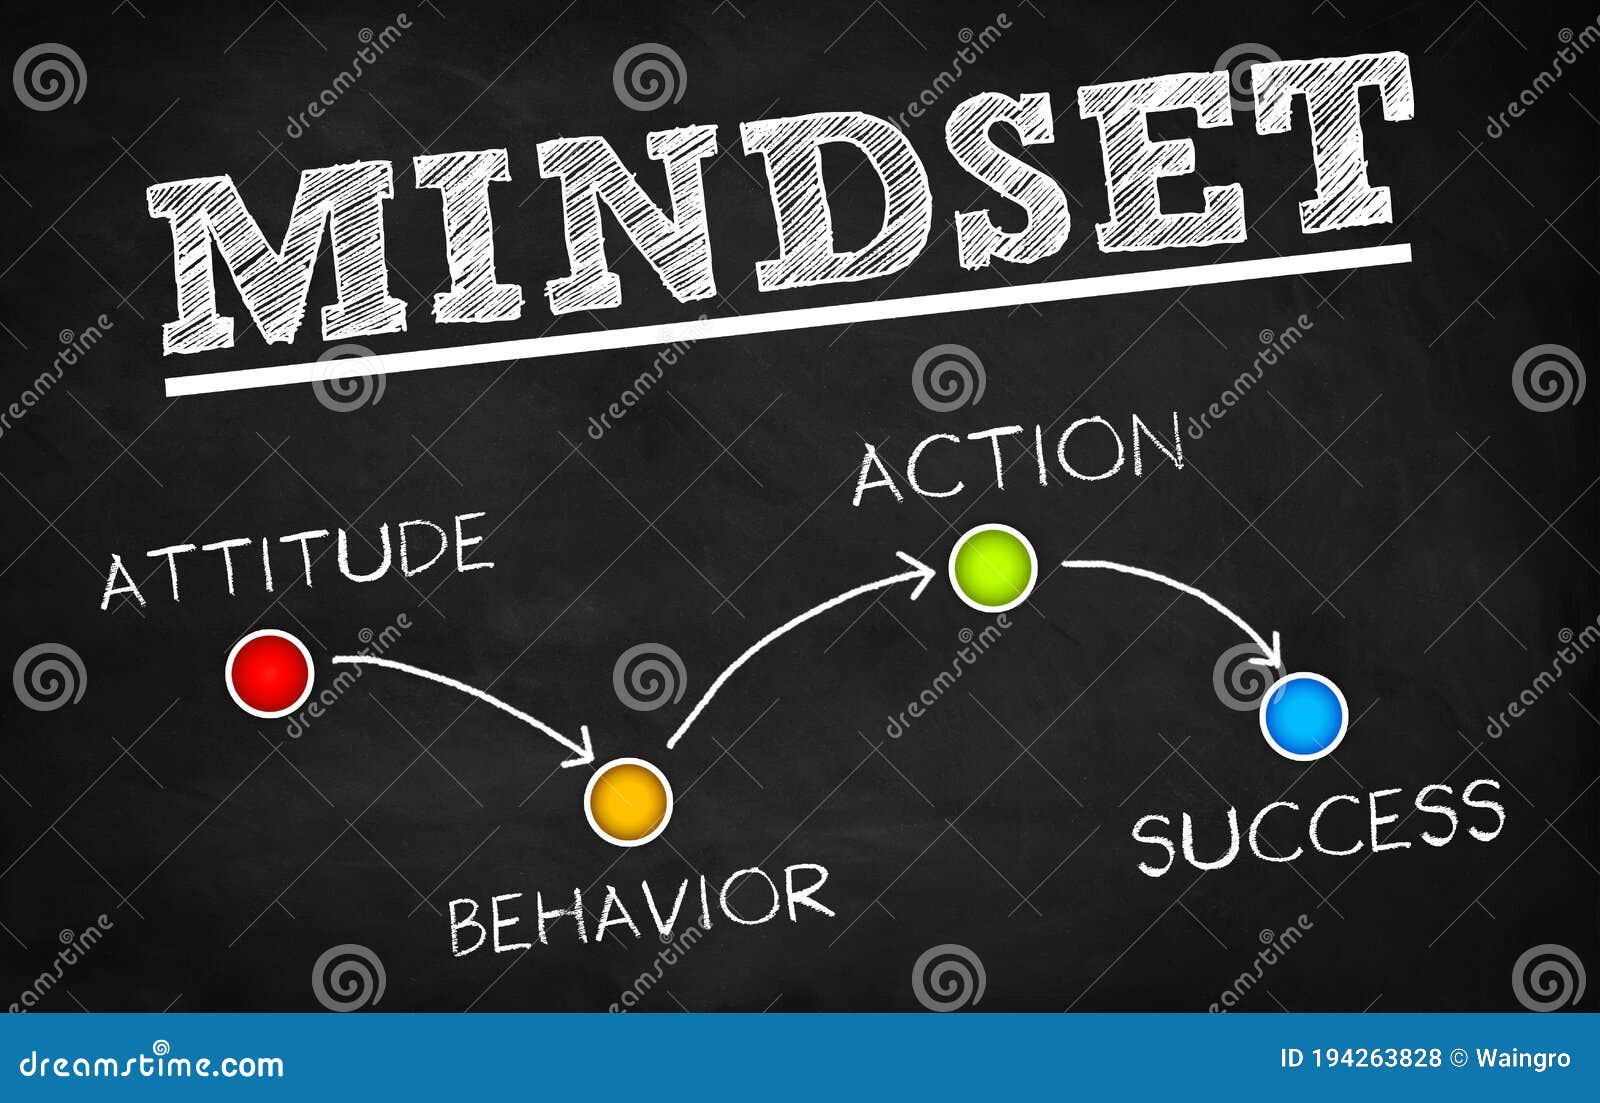 mindset is everything for success